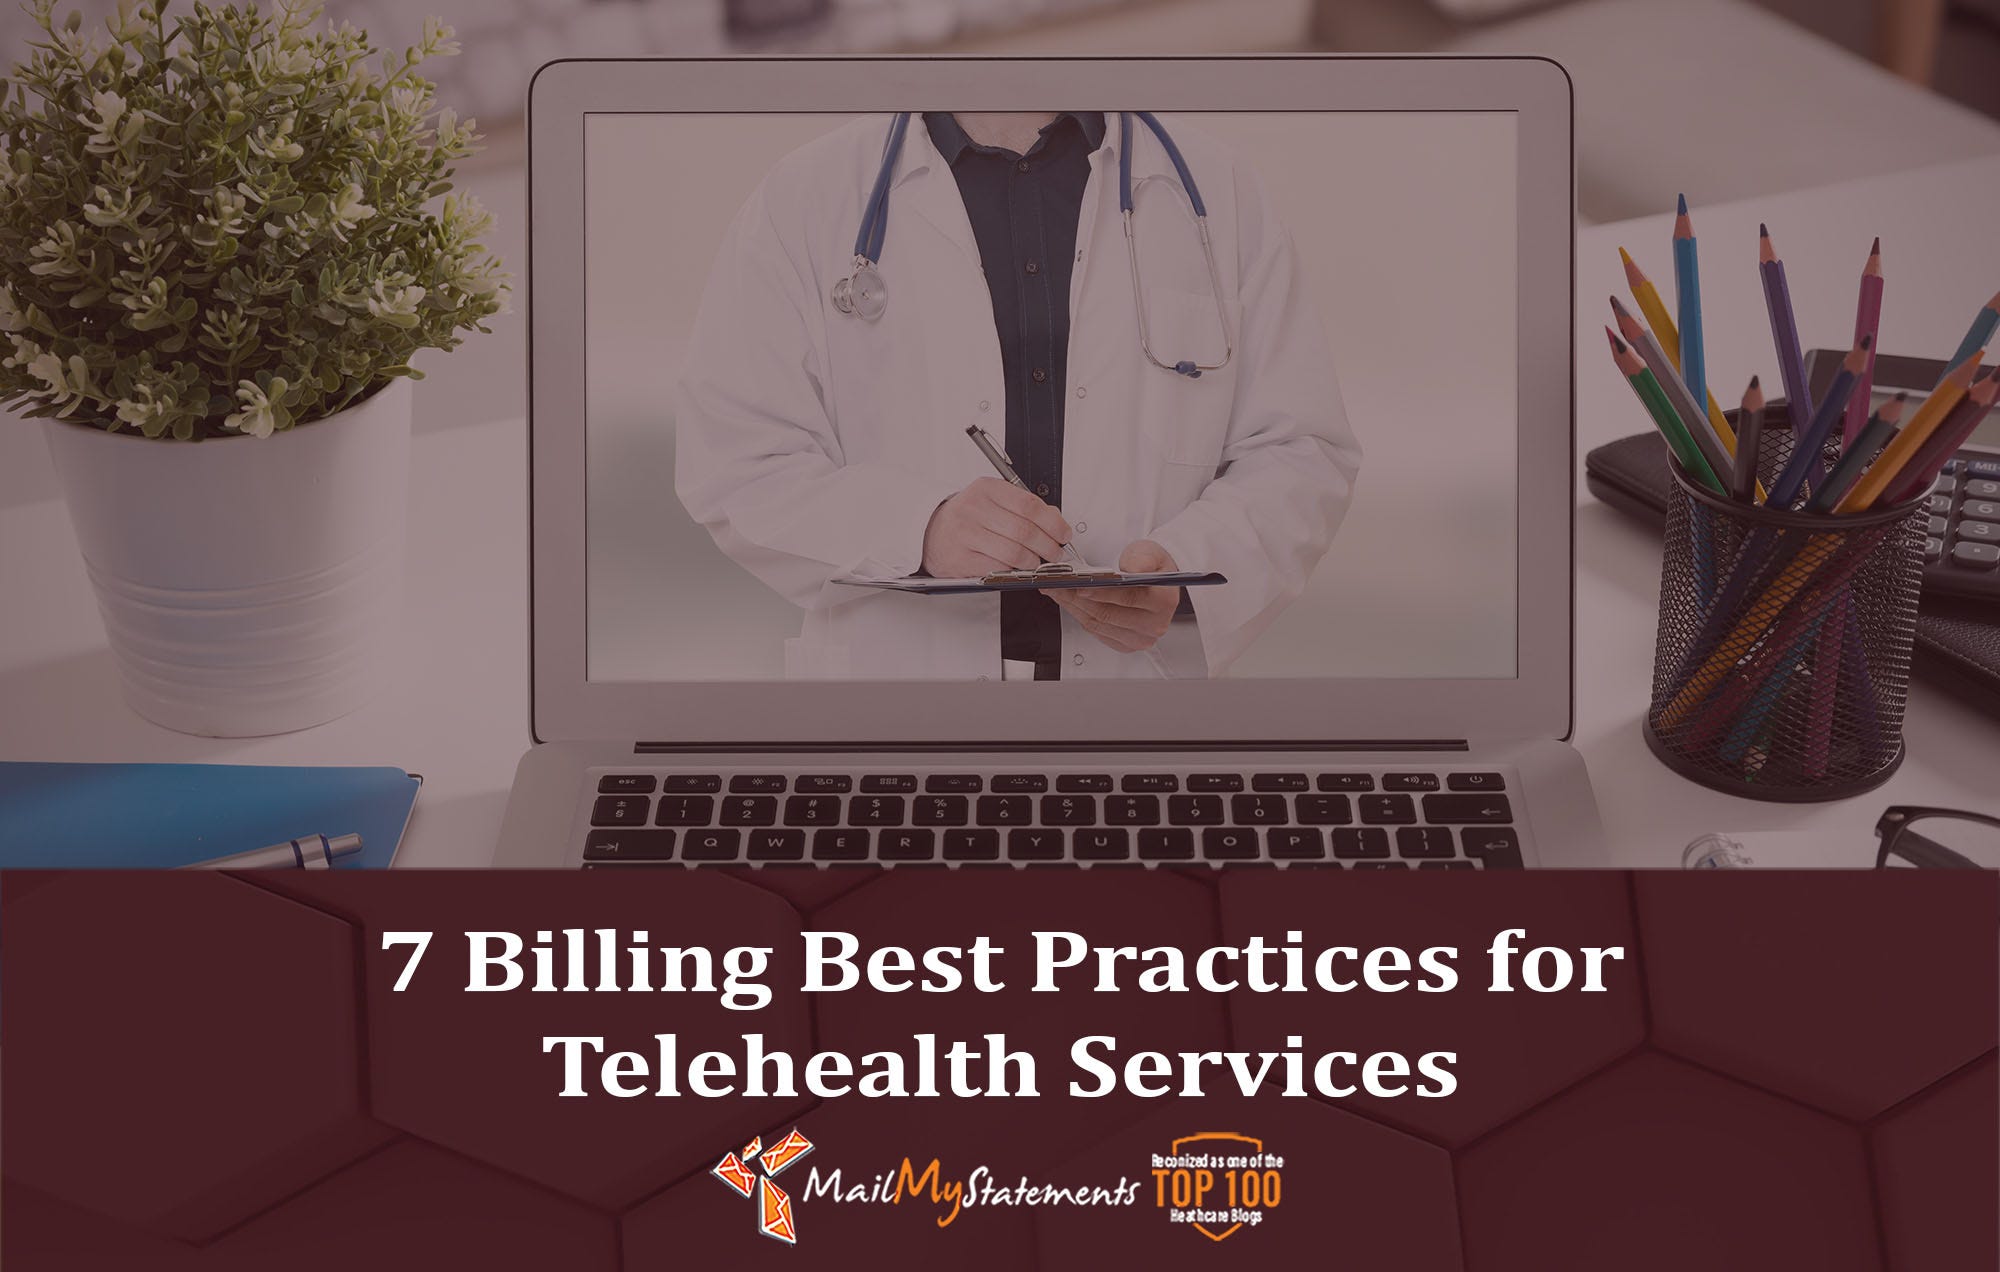 Services 7 Telehealth for Best ... Practices Billing